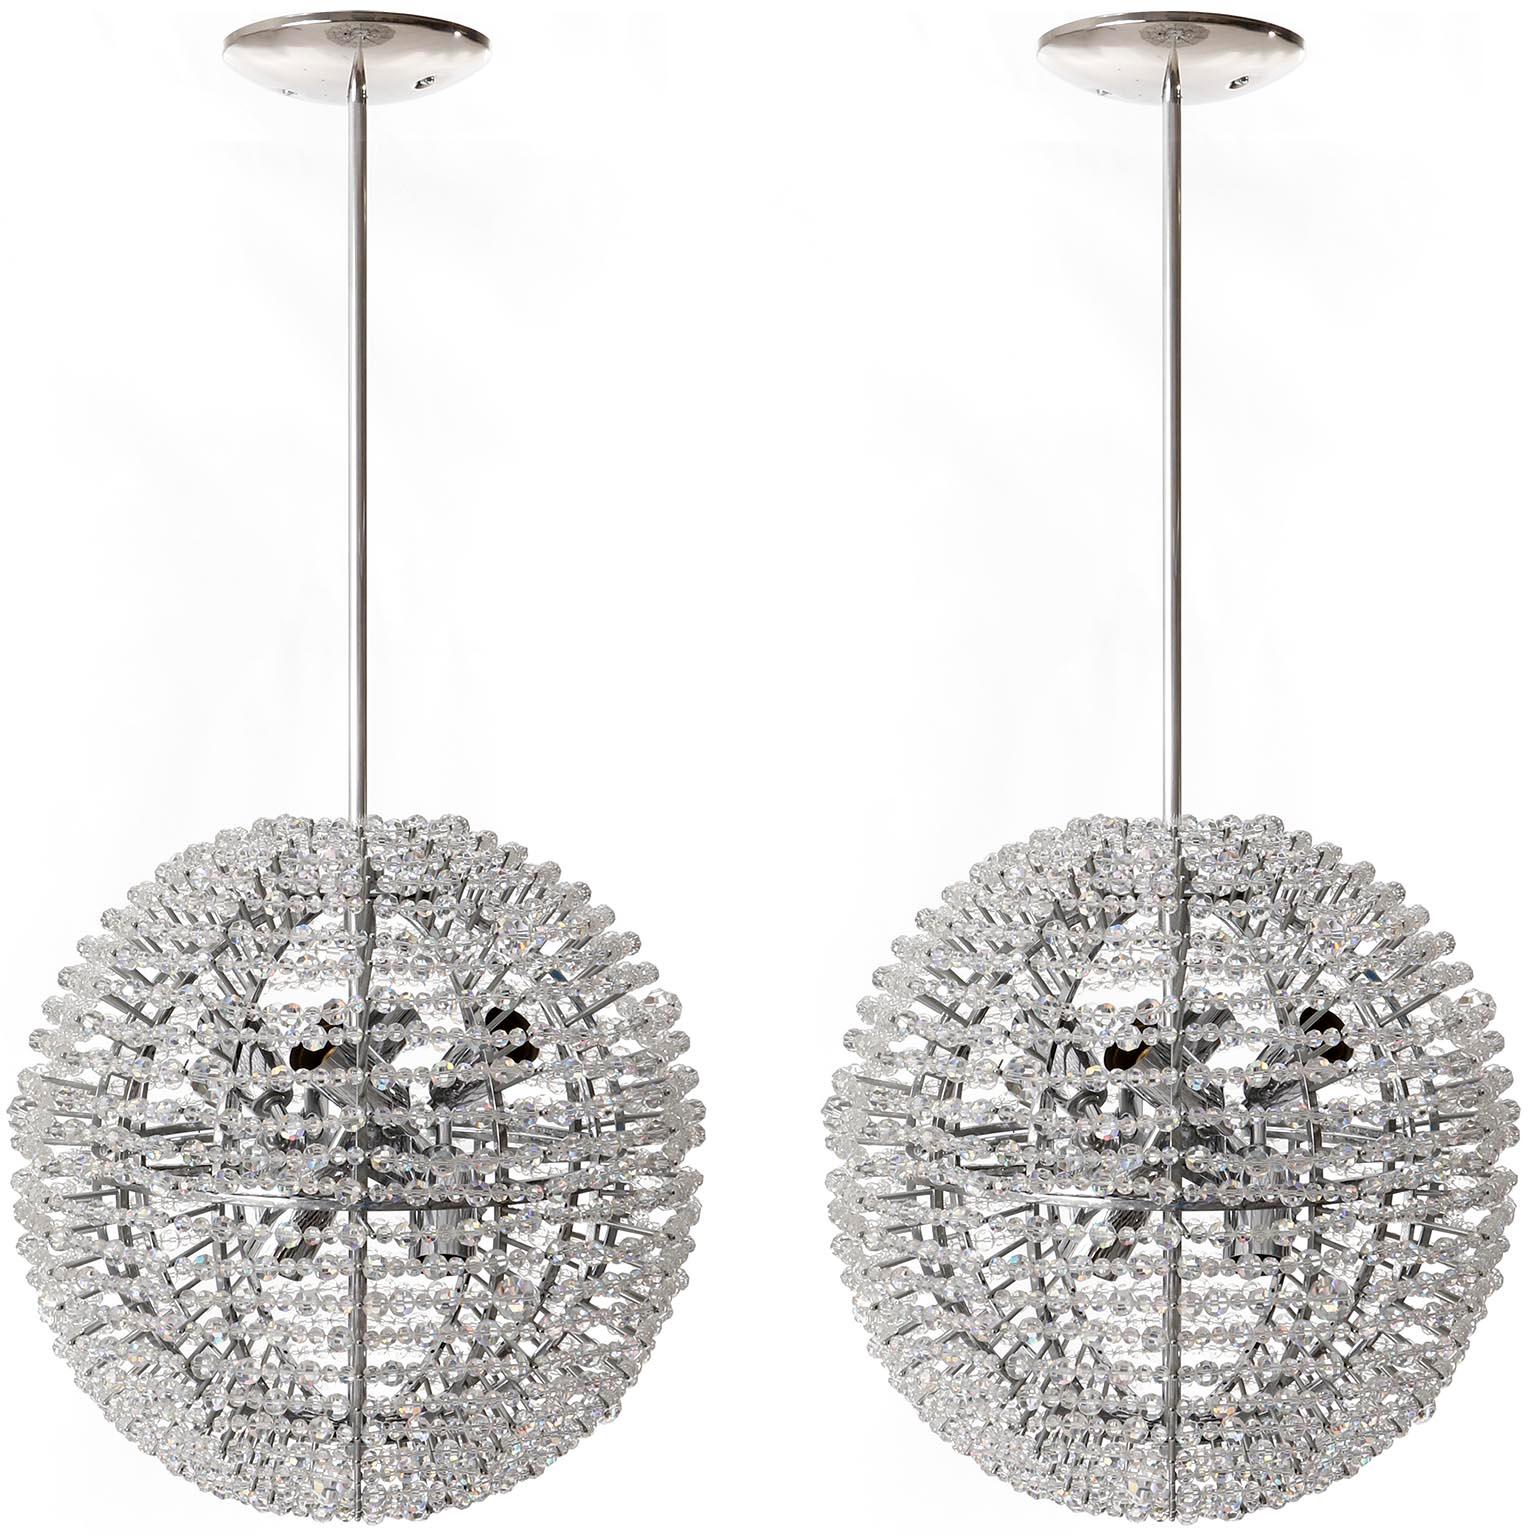 One of two ultra rare and fantastic Supernova Sputnik chandeliers or pendant lights by Bakalowits & Soehne, Austria, Vienna, manufactured in midcentury, circa 1960.
The price is per chandelier. They are sold individually or as pair.
A ball shaped